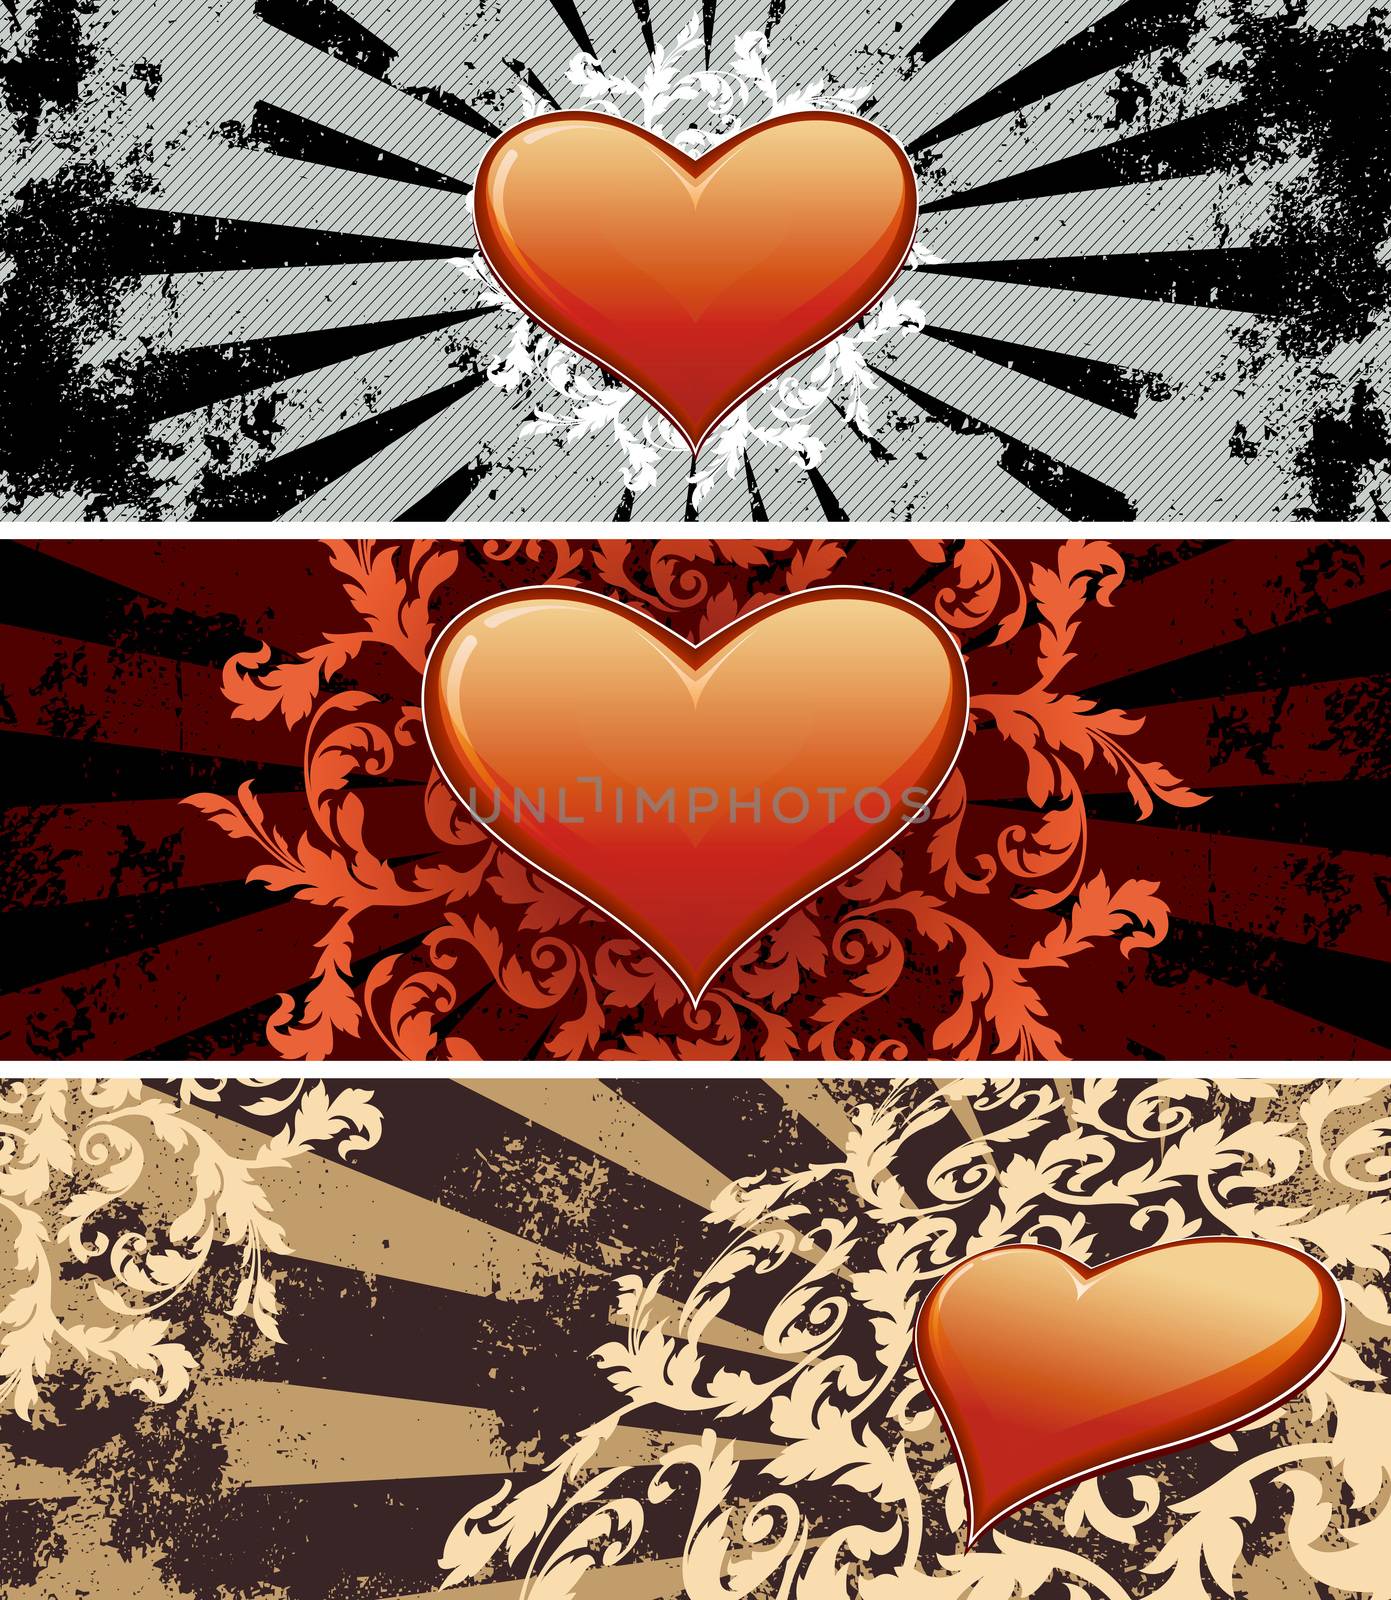 Color Saint Valentine's banners with flowers and heart shapes